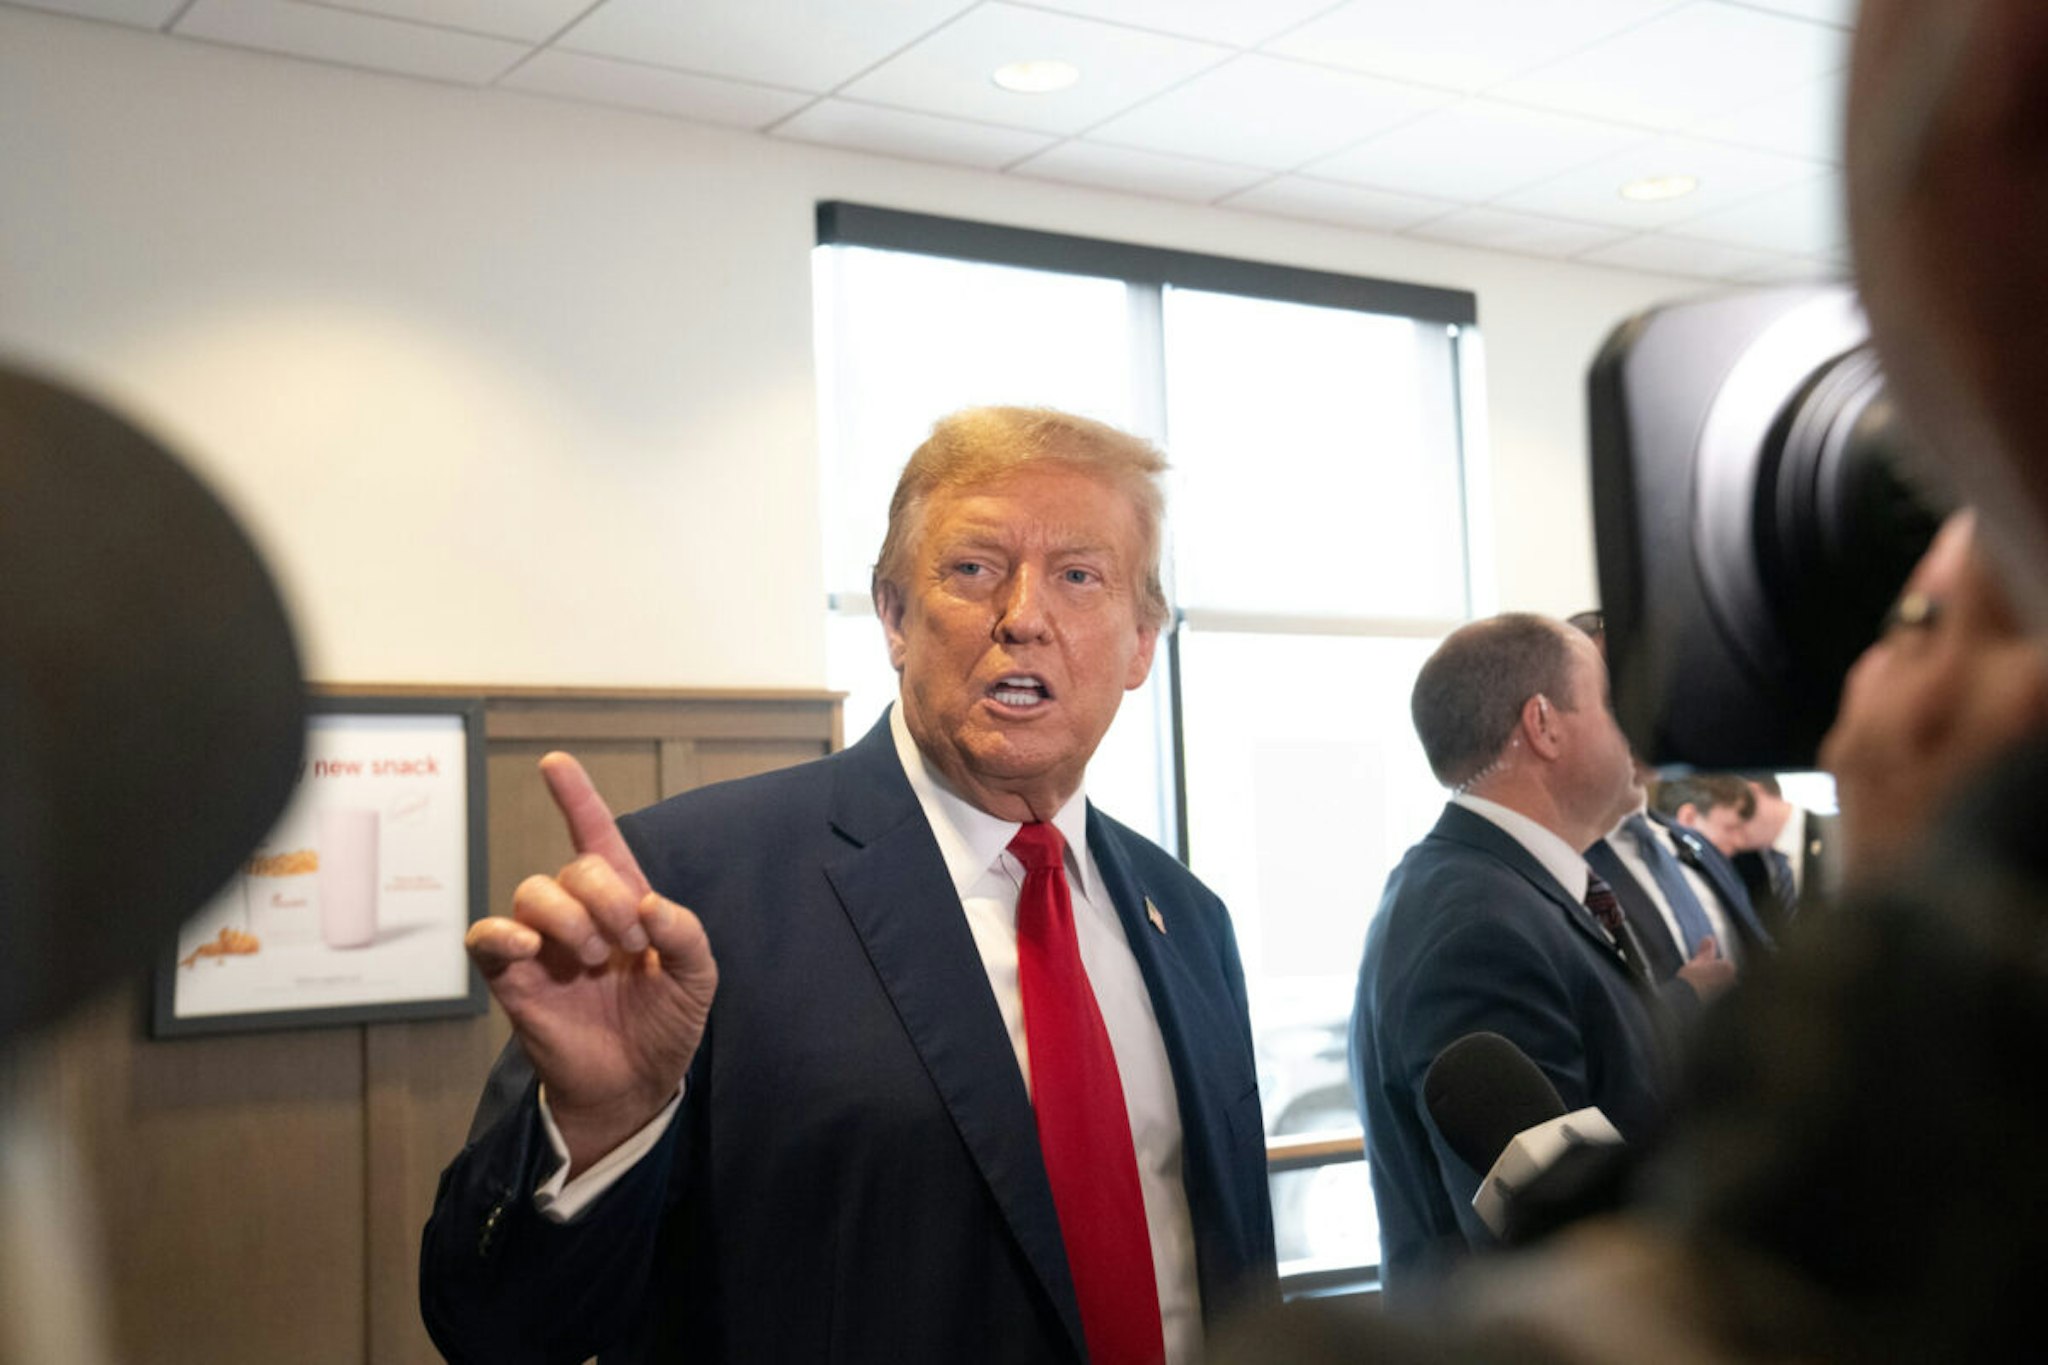 Former U.S. President Donald Trump speaks to the media during a visit to a Chick-fil-A restaurant on April 10, 2024 in Atlanta, Georgia. Trump is visiting Atlanta for a campaign fundraising event he is hosting.